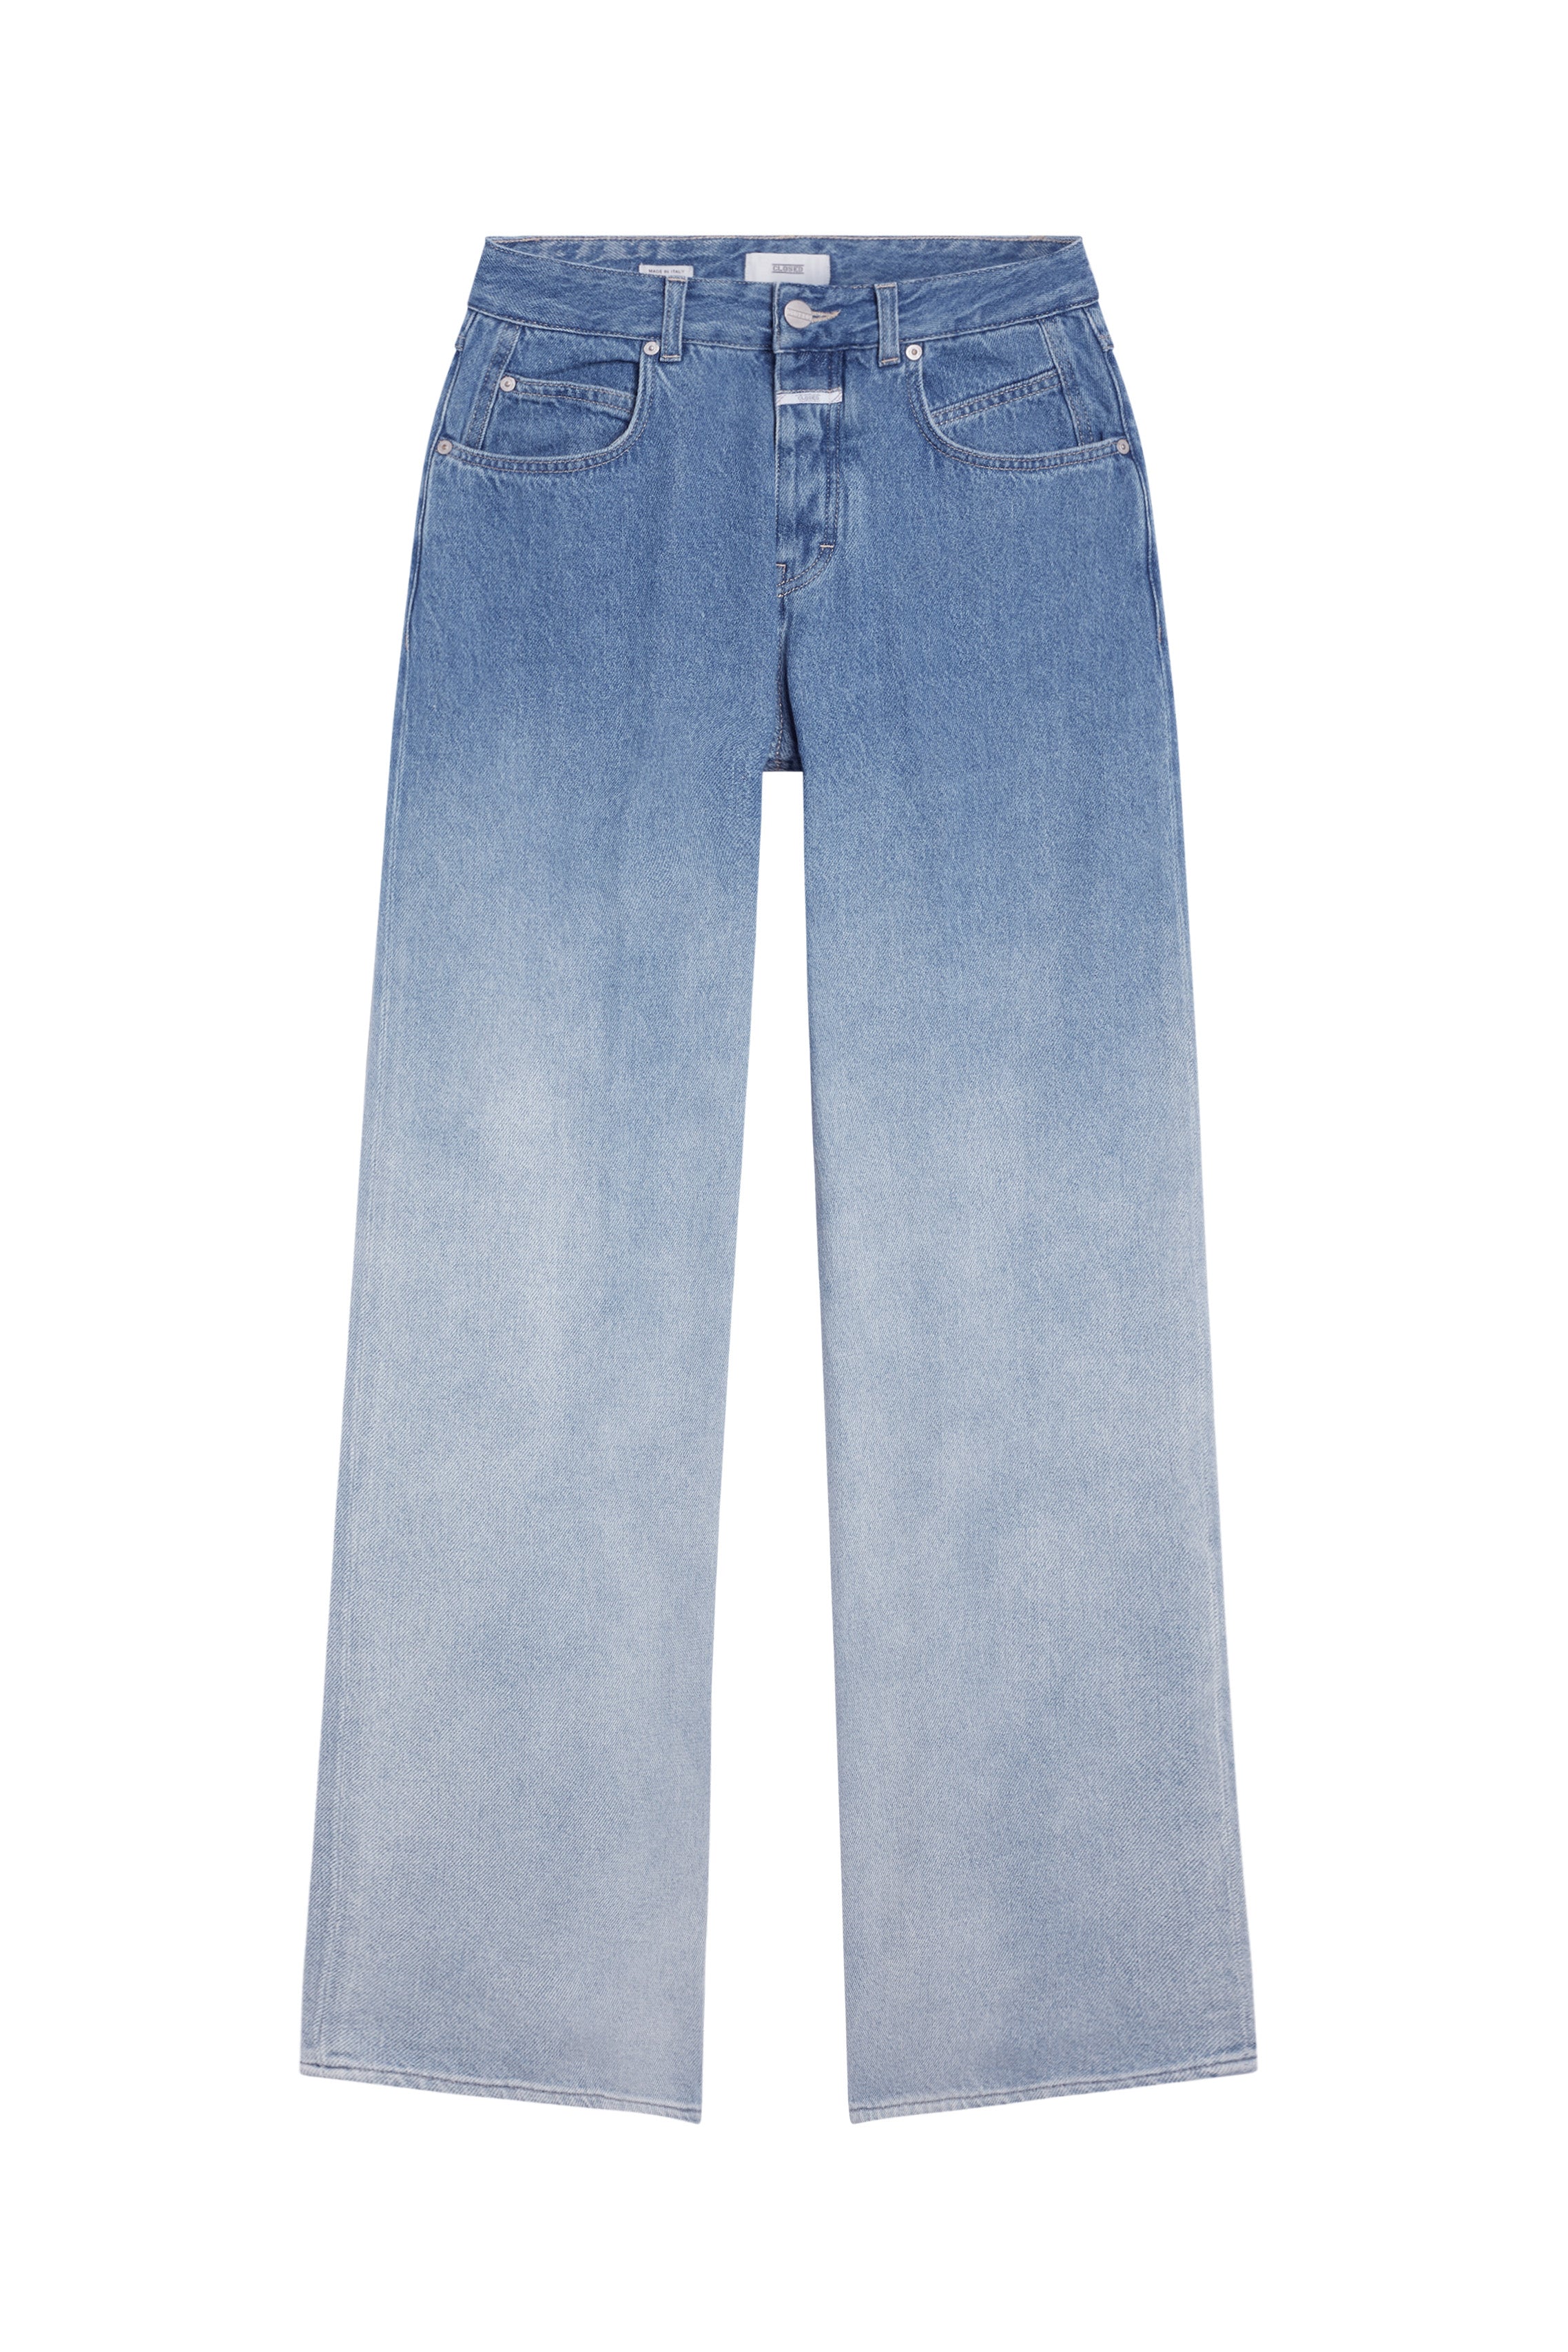 Introducing Nikka from Closed, a wide fit jean made of Italian open weave denim.